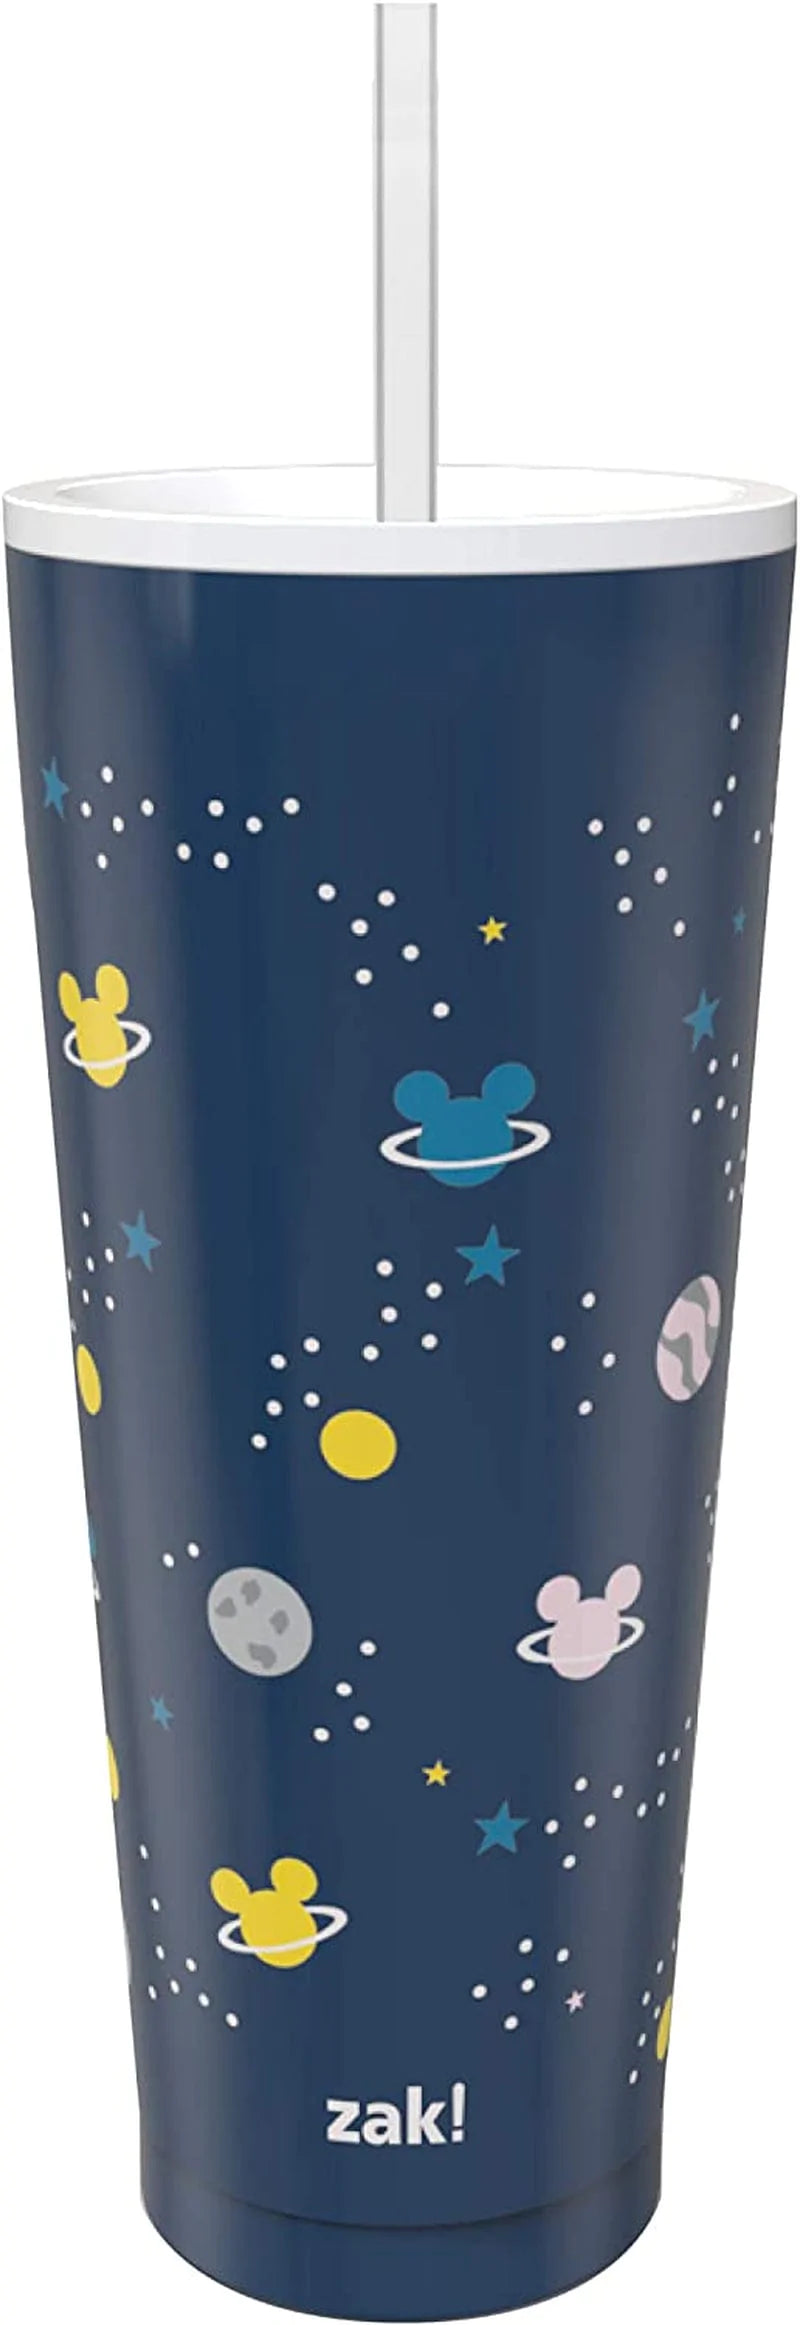 Zak Designs Sanrio Hello Kitty Vacuum Insulated Stainless Steel Travel Tumbler with Splash-Proof Lid, Includes Reusable Plastic Straw and Fits in Car Cup Holders (18/8 SS, 25 Oz) Home & Garden > Kitchen & Dining > Tableware > Drinkware Zak Designs Mickey Mouse-Space 1 Count (Pack of 1) 